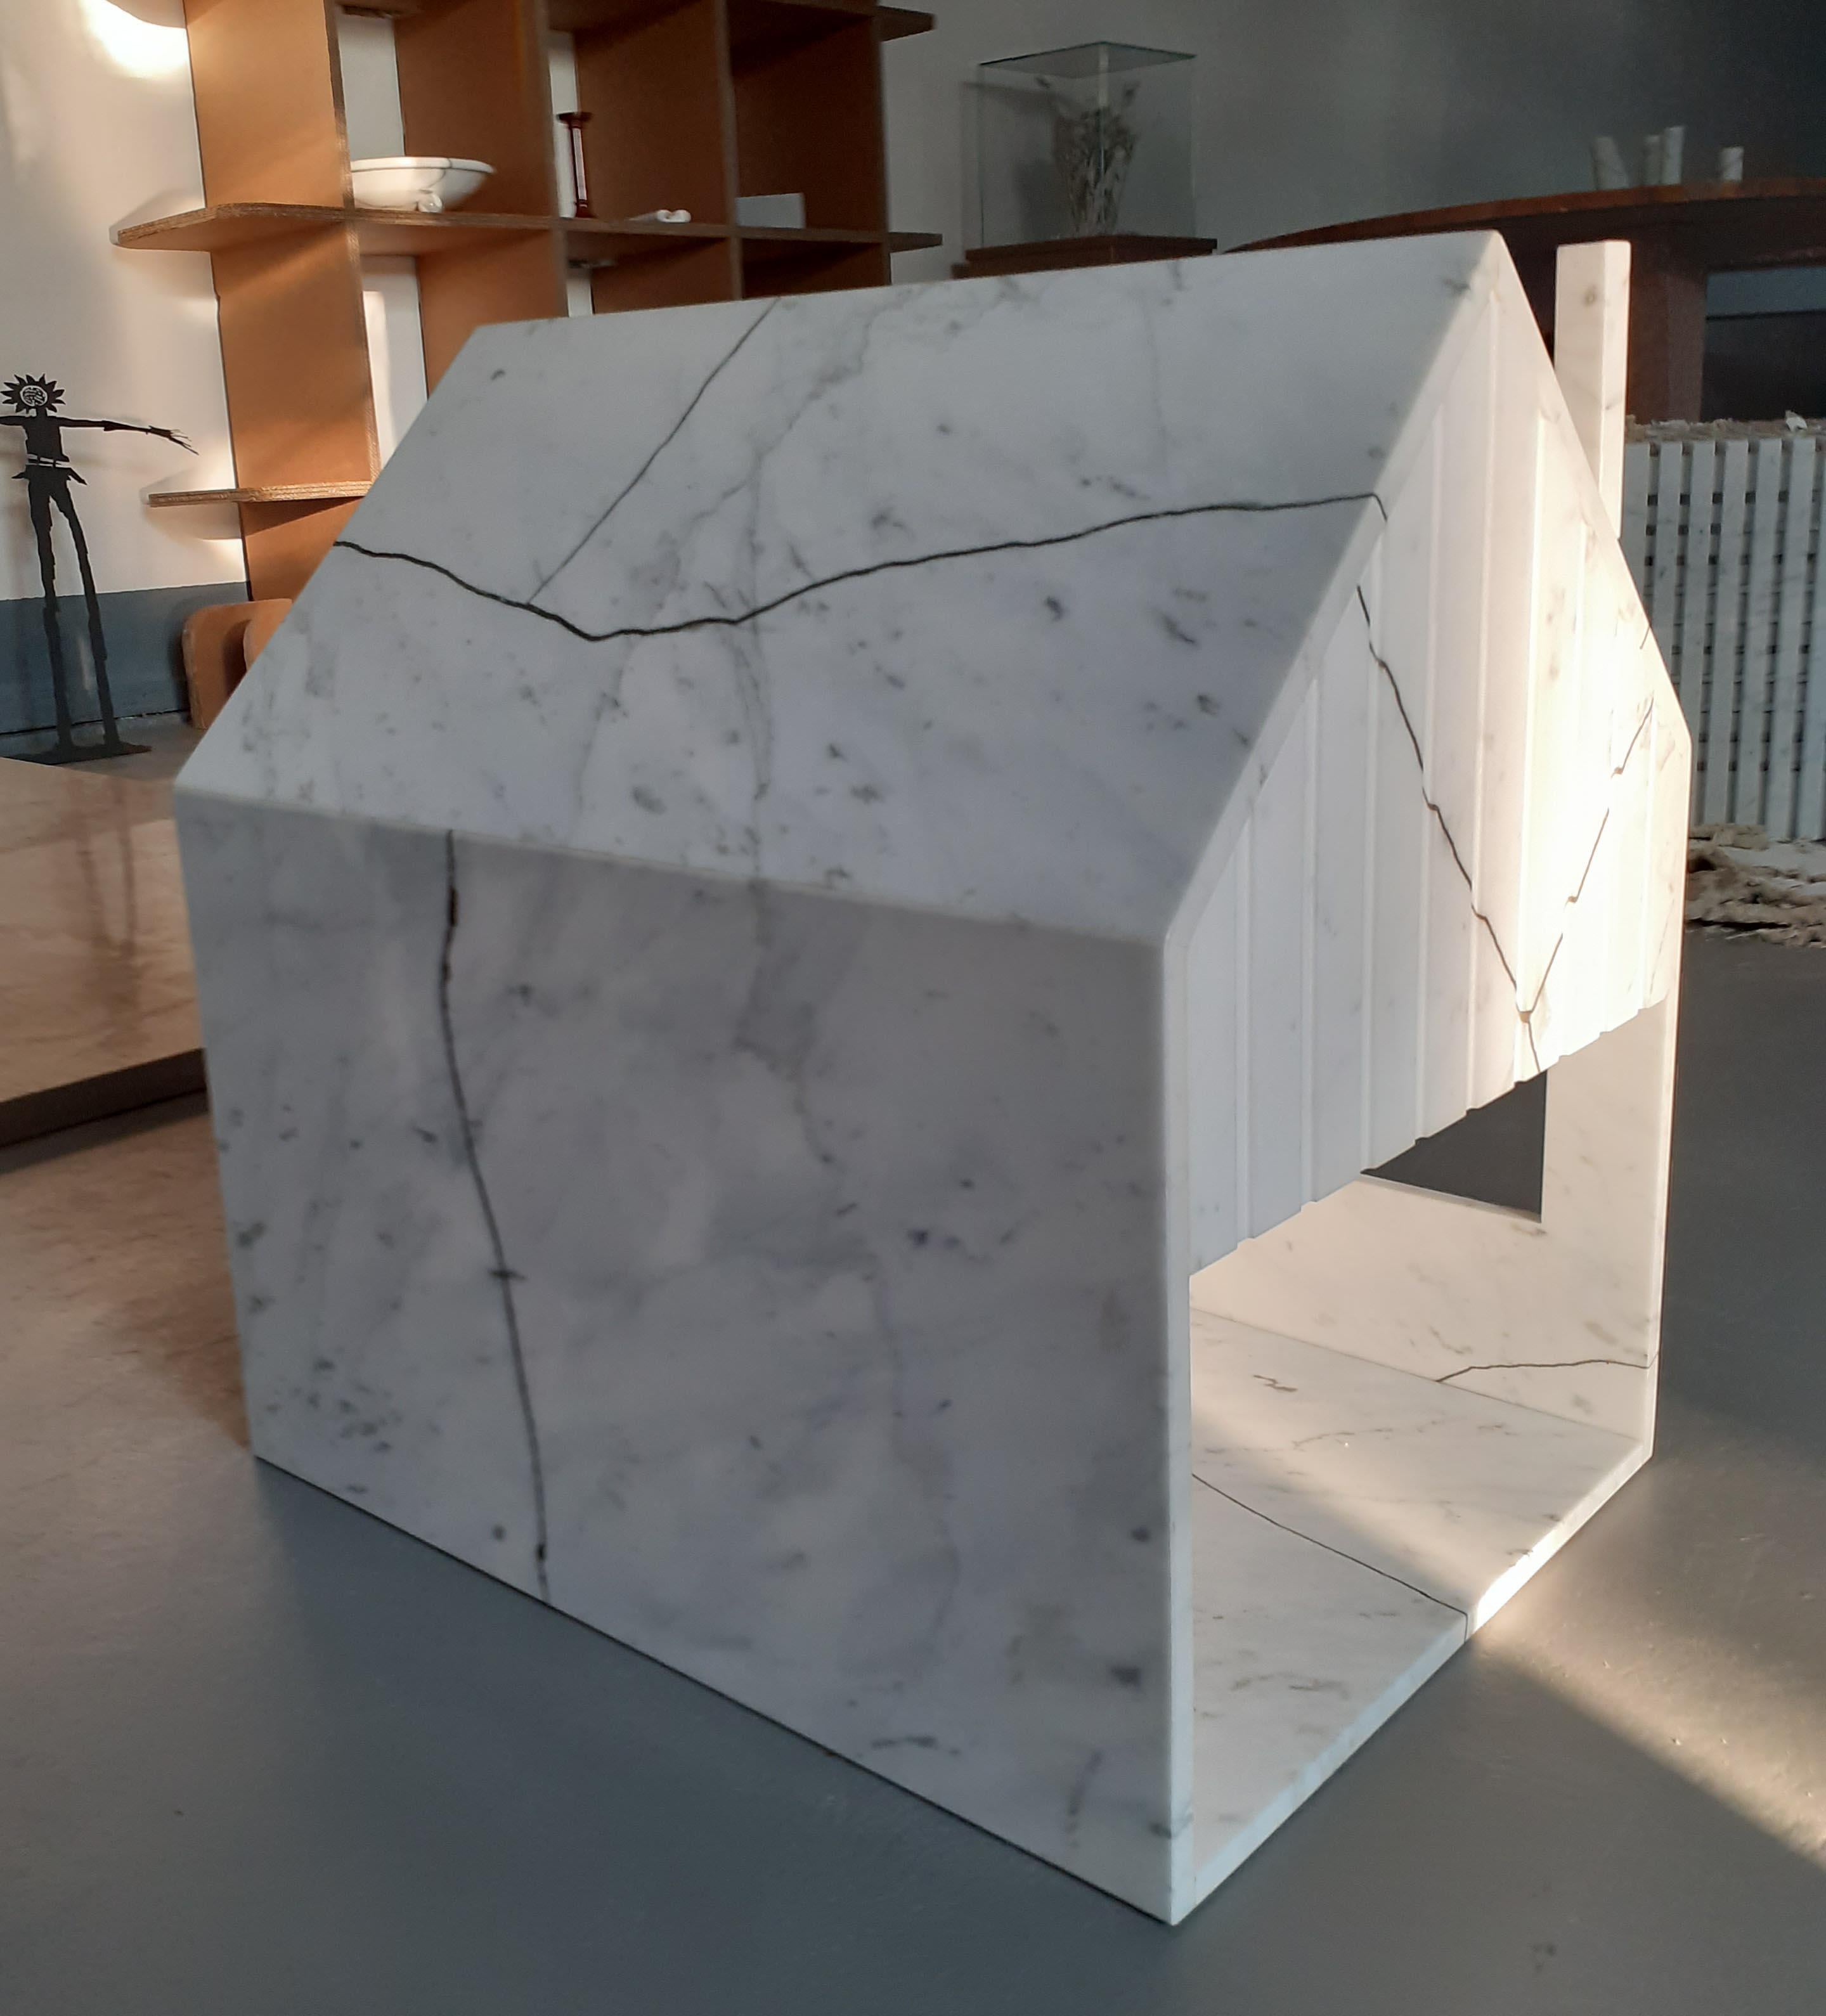 Year 2020
Marble dog house realized with reclaimed Carrara white Statuario & upcycled brass
Materials: upcycled brass, reclaimed Carrara white Statuario
Size: 38 x 51 x 50 cm.